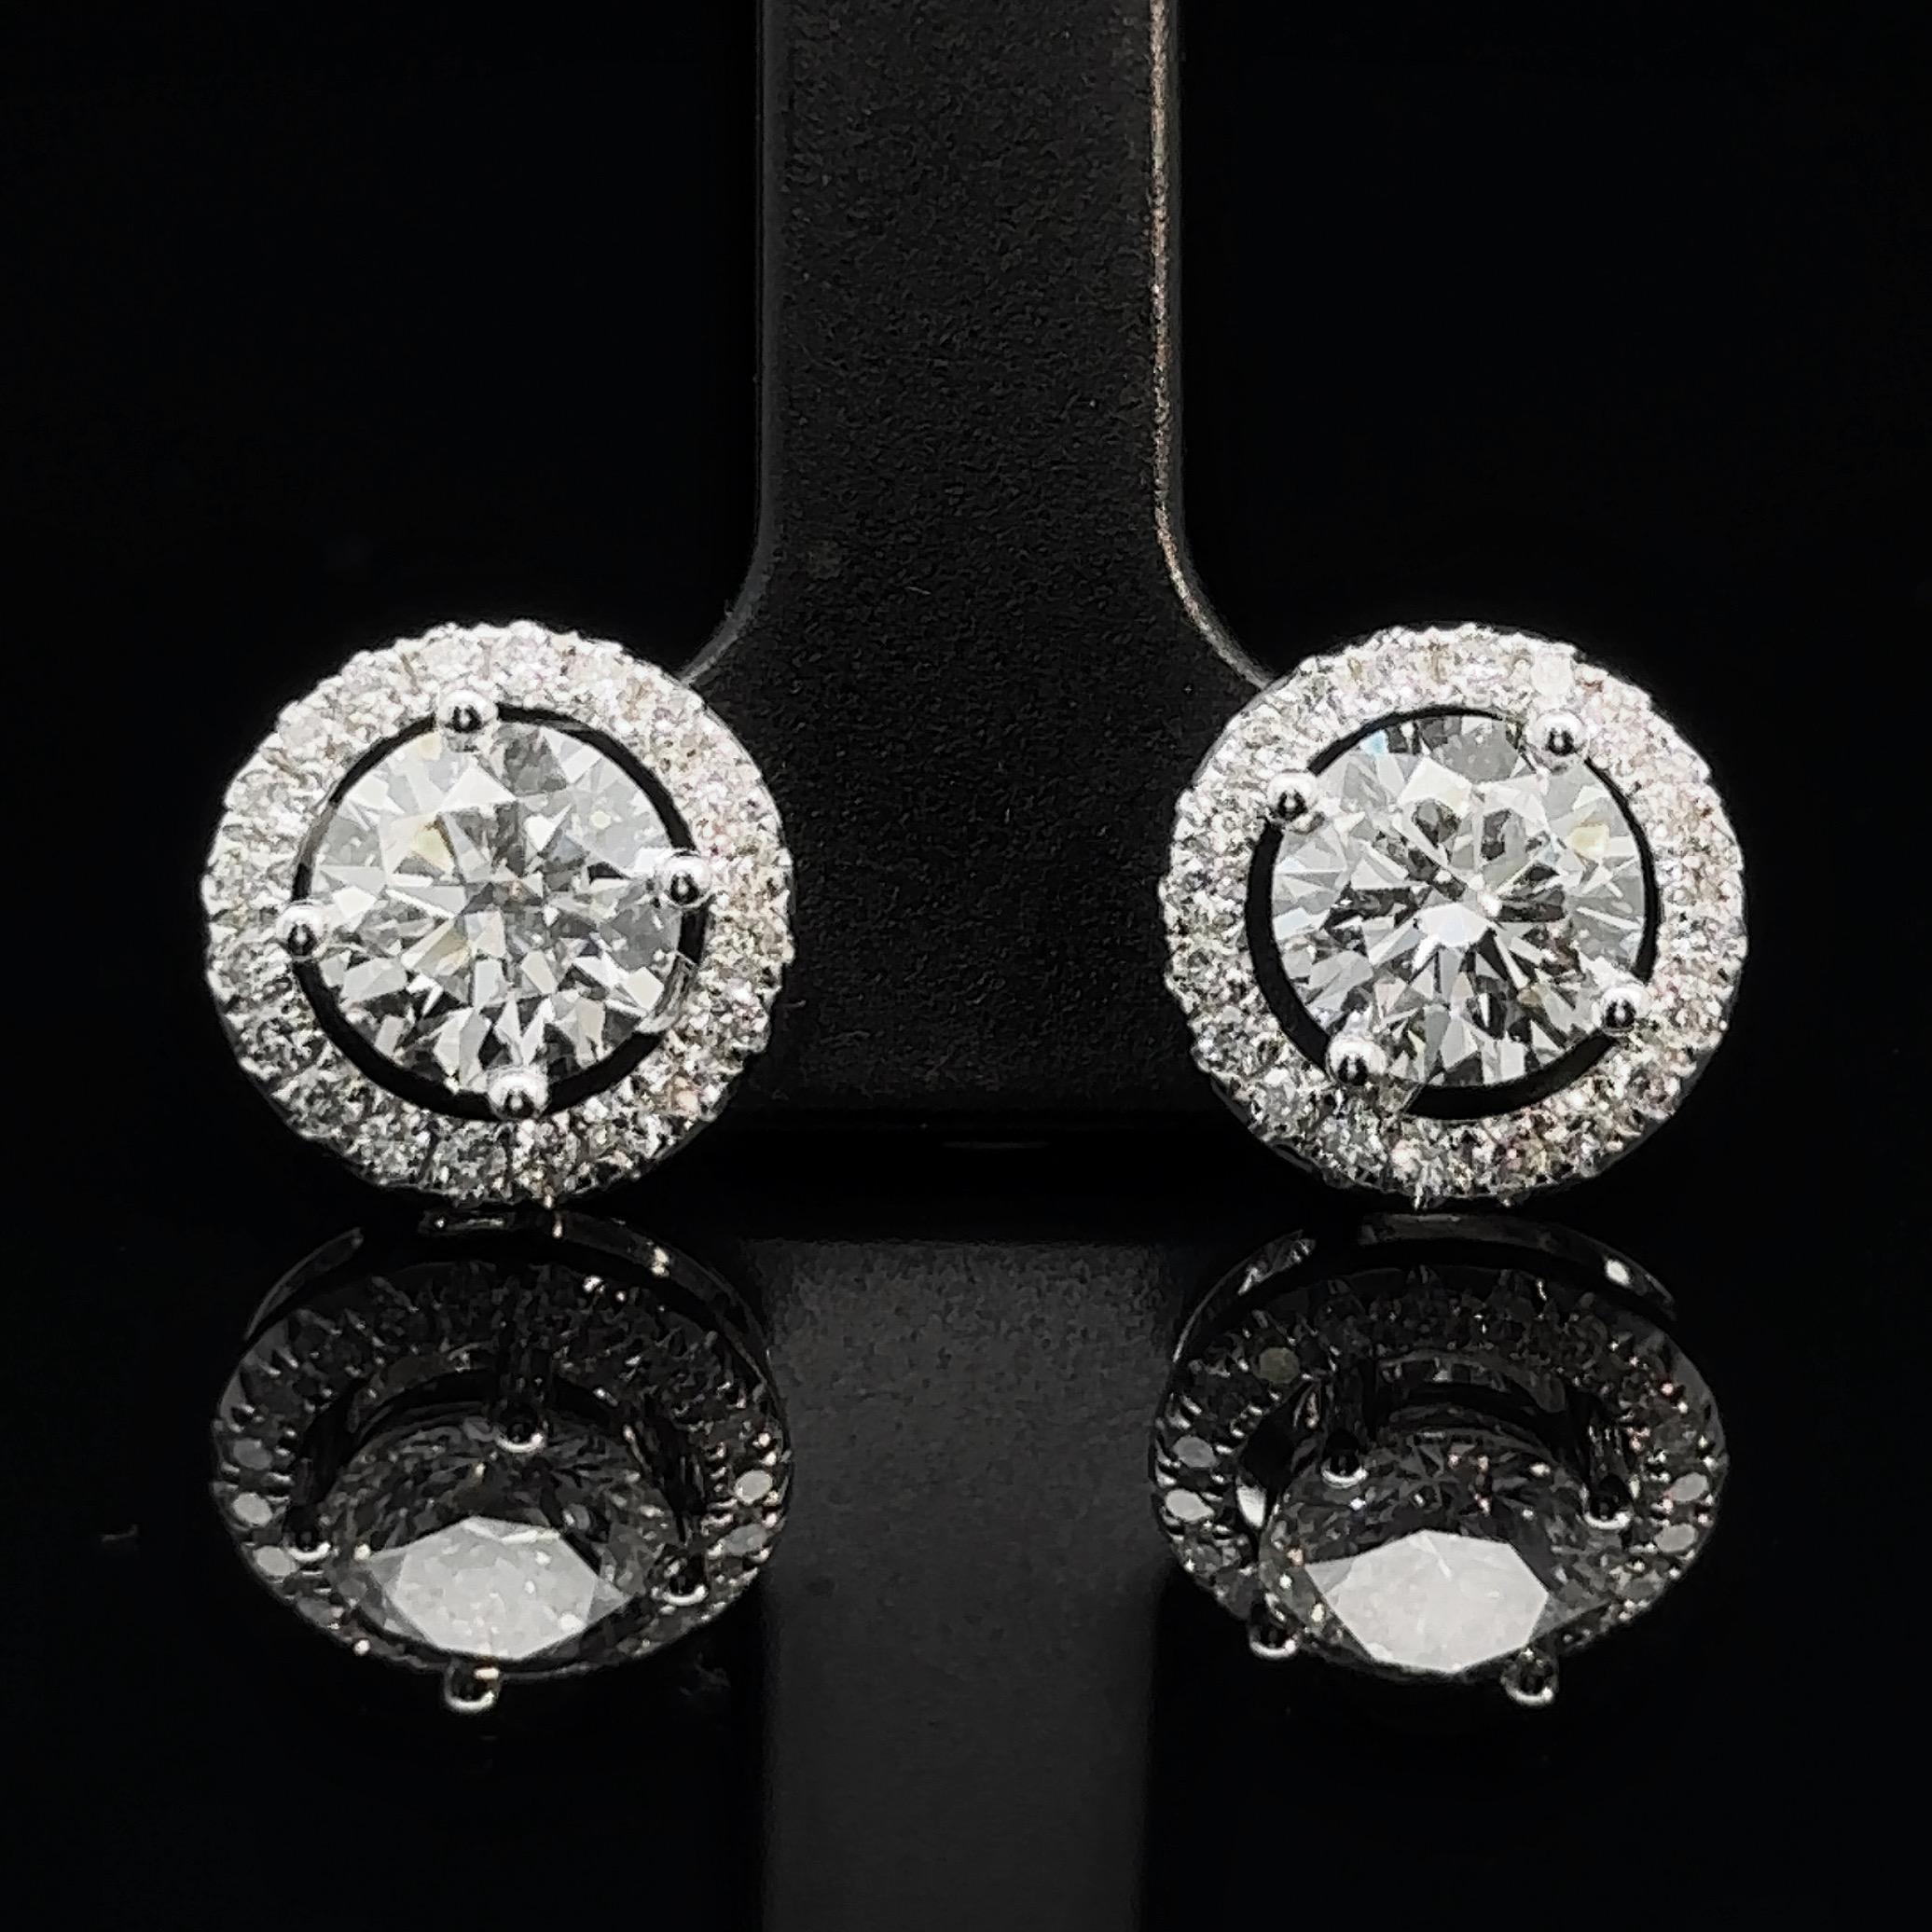 
Made to Order

introducing our exquisite GIA-certified 2 carats diamond halo 18k white gold stud earrings! Each earring features a brilliant 1 carat round-cut diamond, certified by the Gemological Institute of America (GIA), ensuring the highest